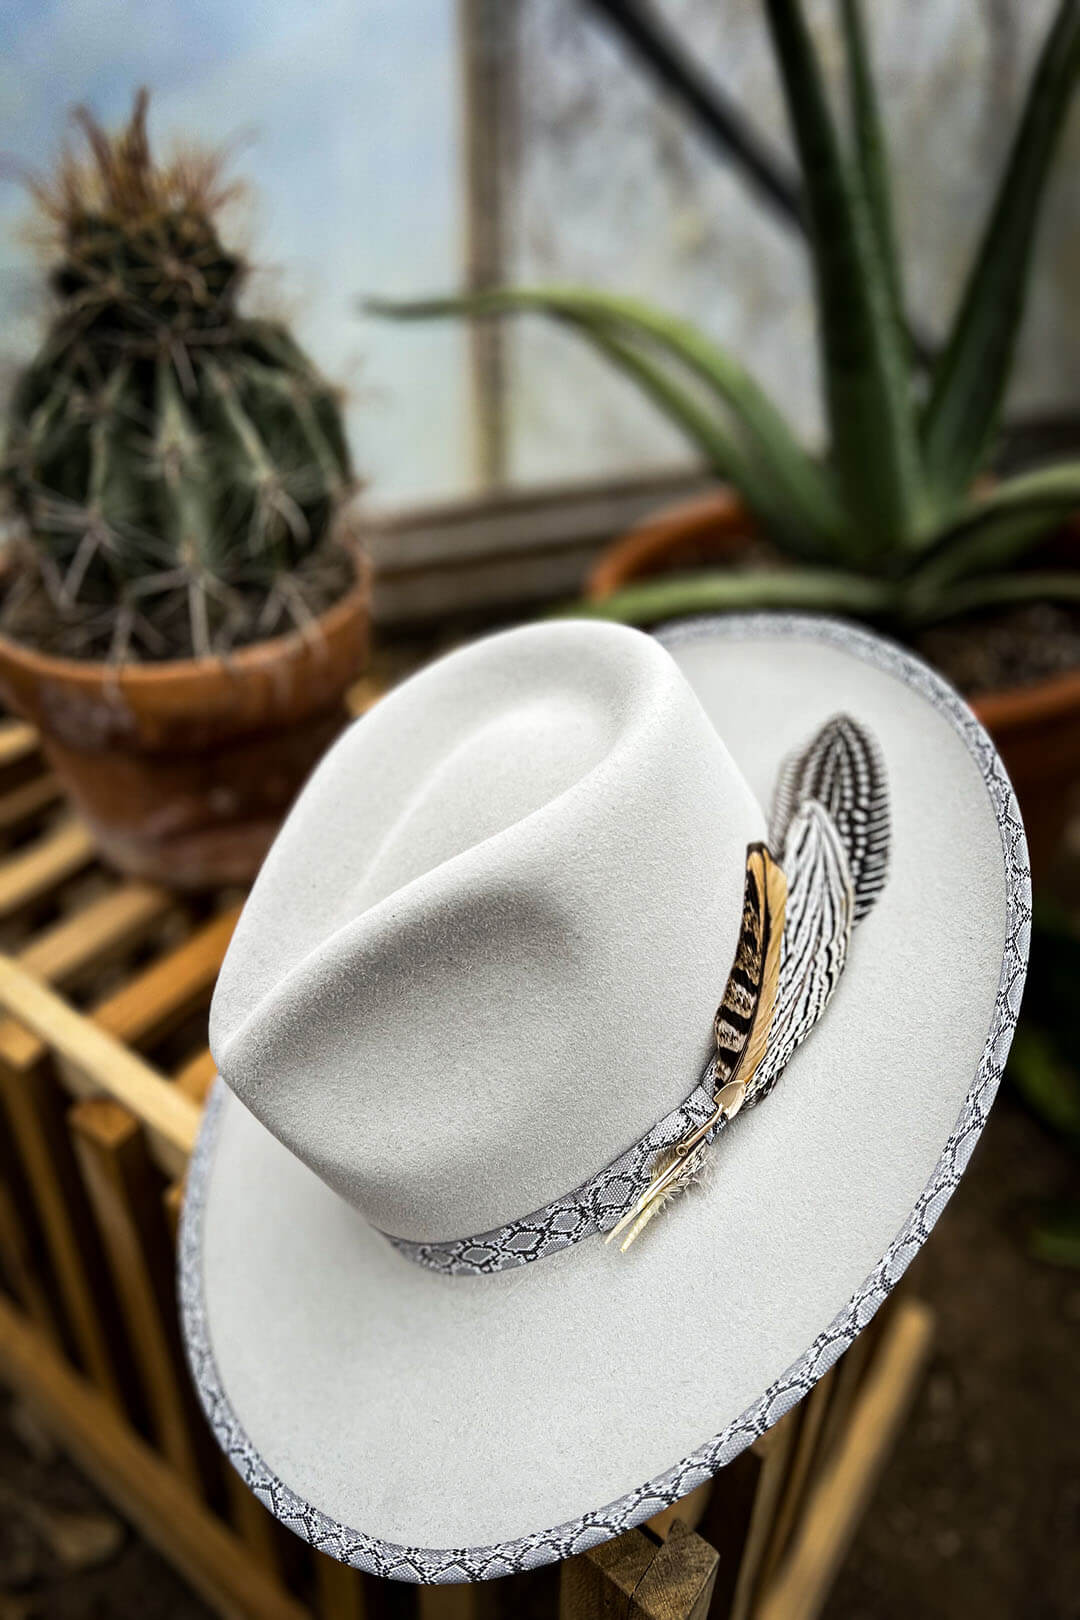 Picture of the stetson rattler hat featuring feathers on side and snake print design band on rim and inner part of hat. 